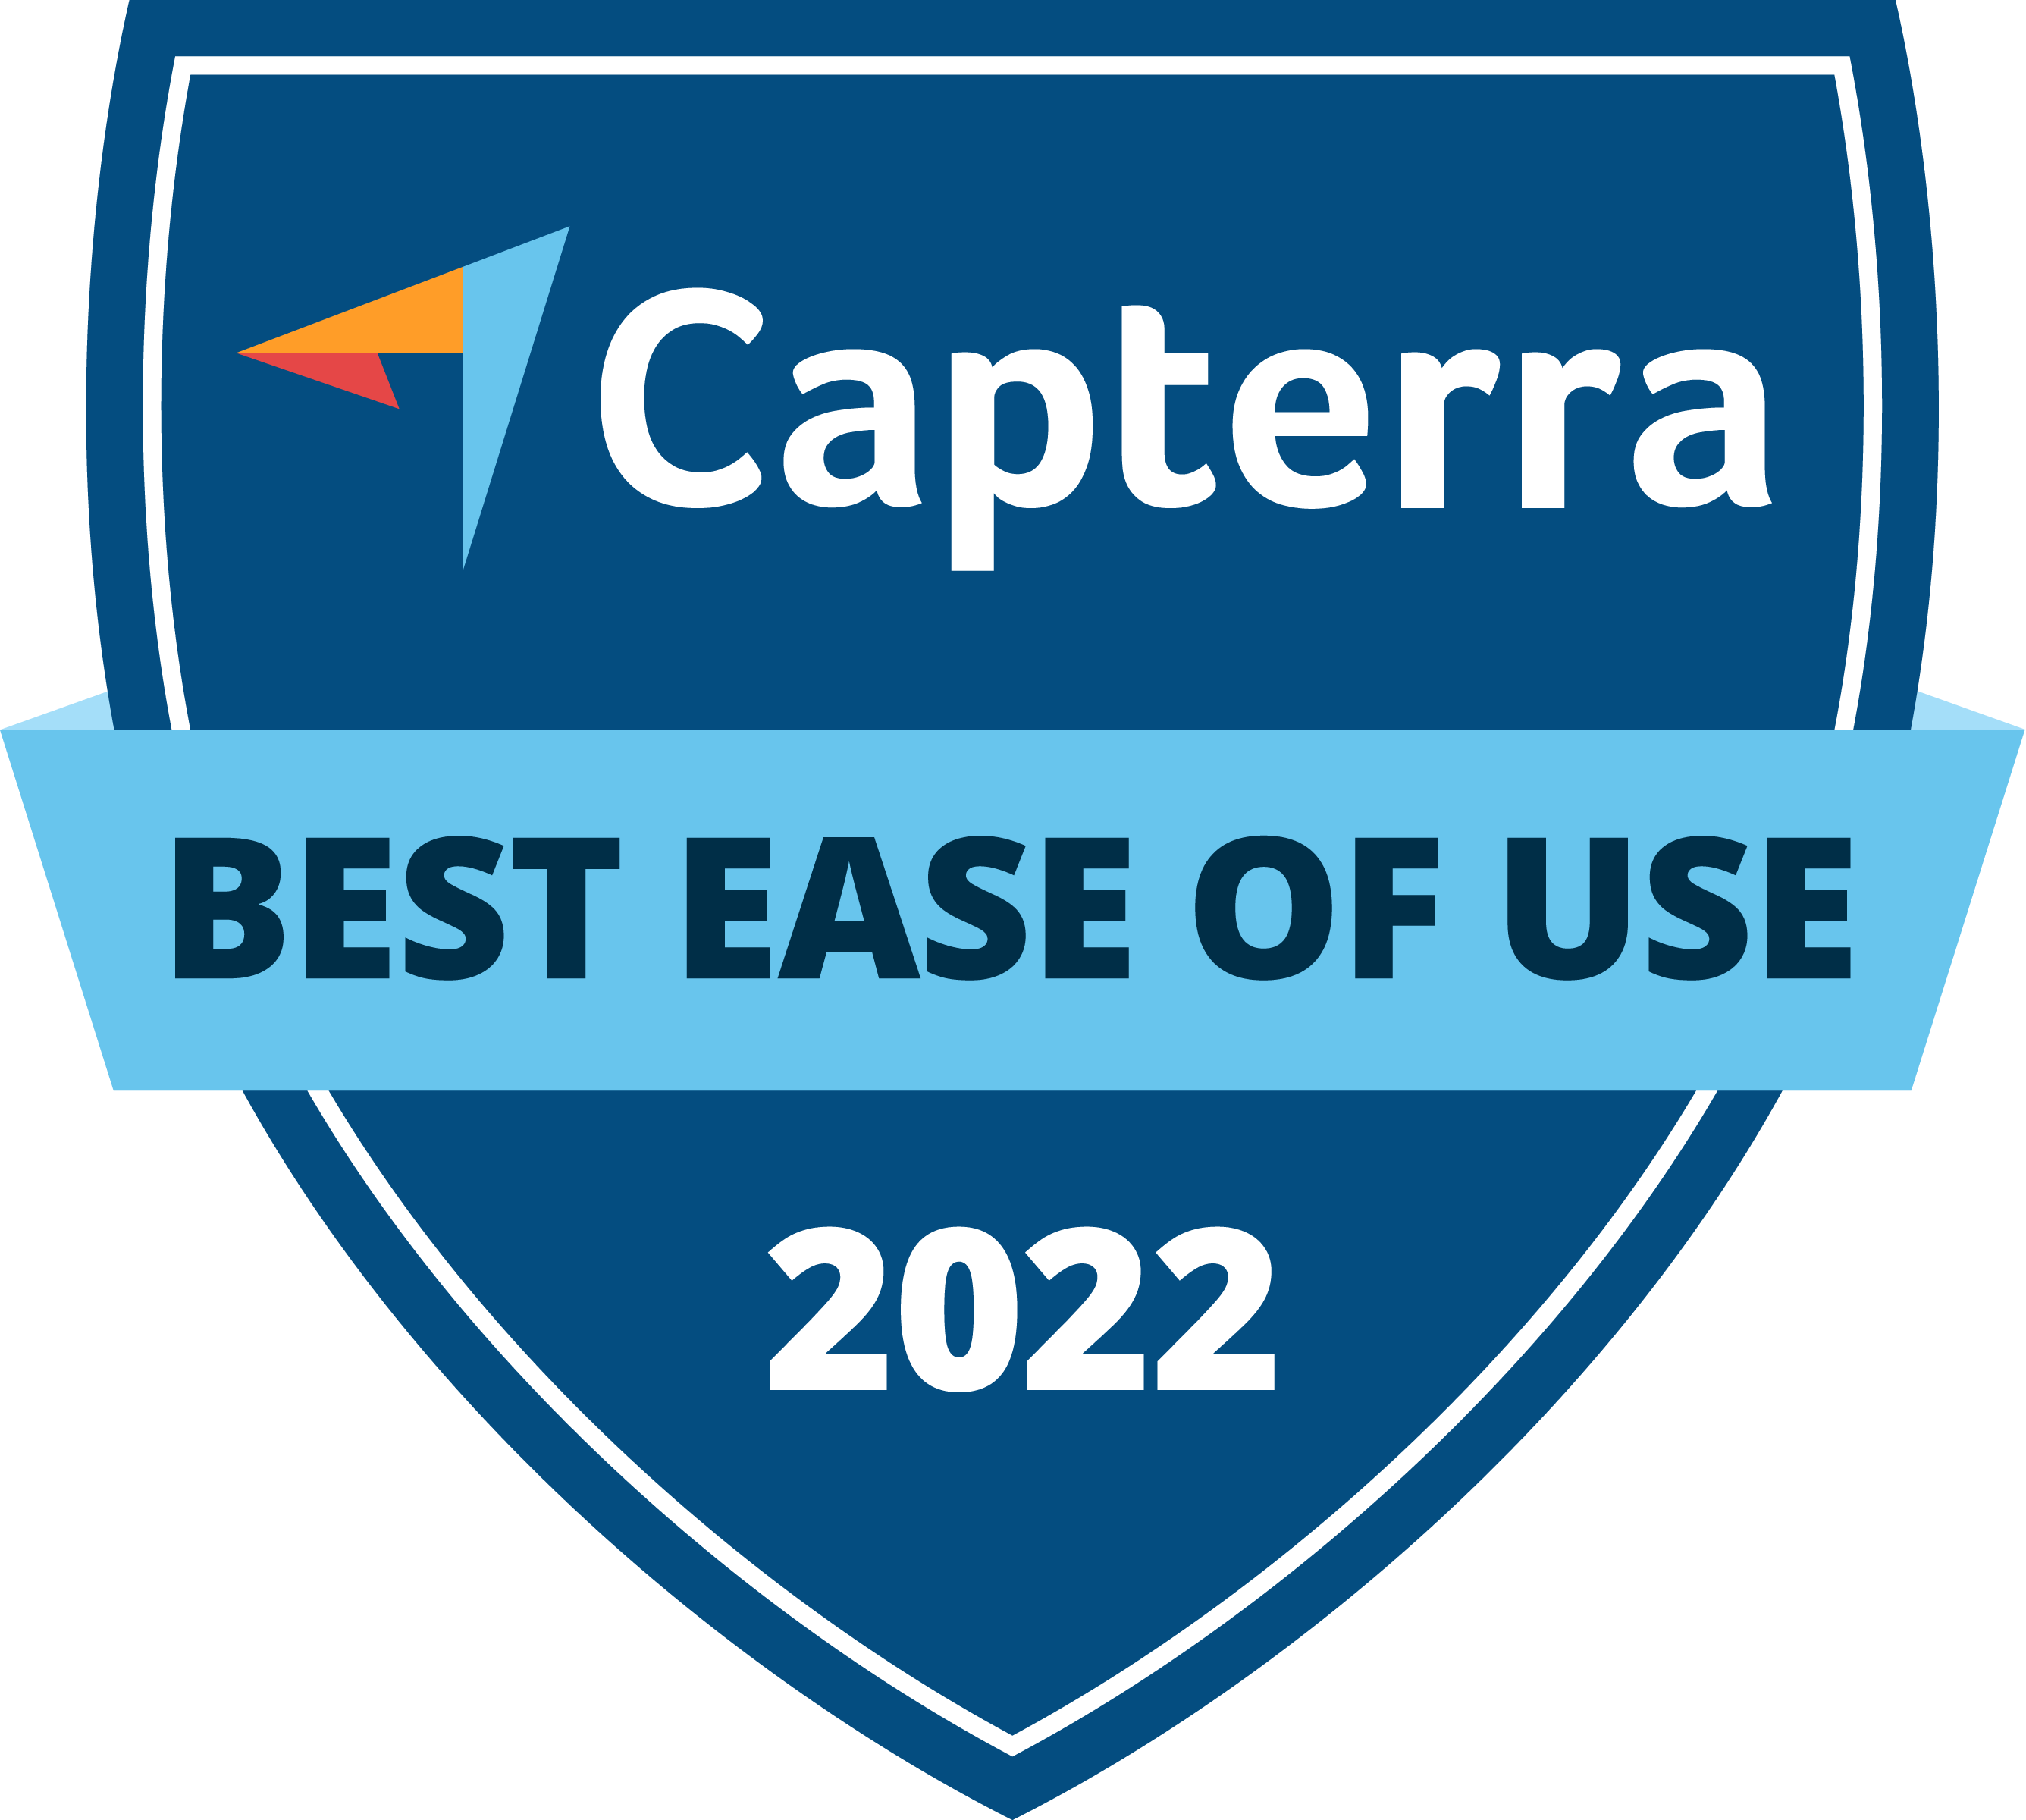 Capterra - Best Ease of Use 2022